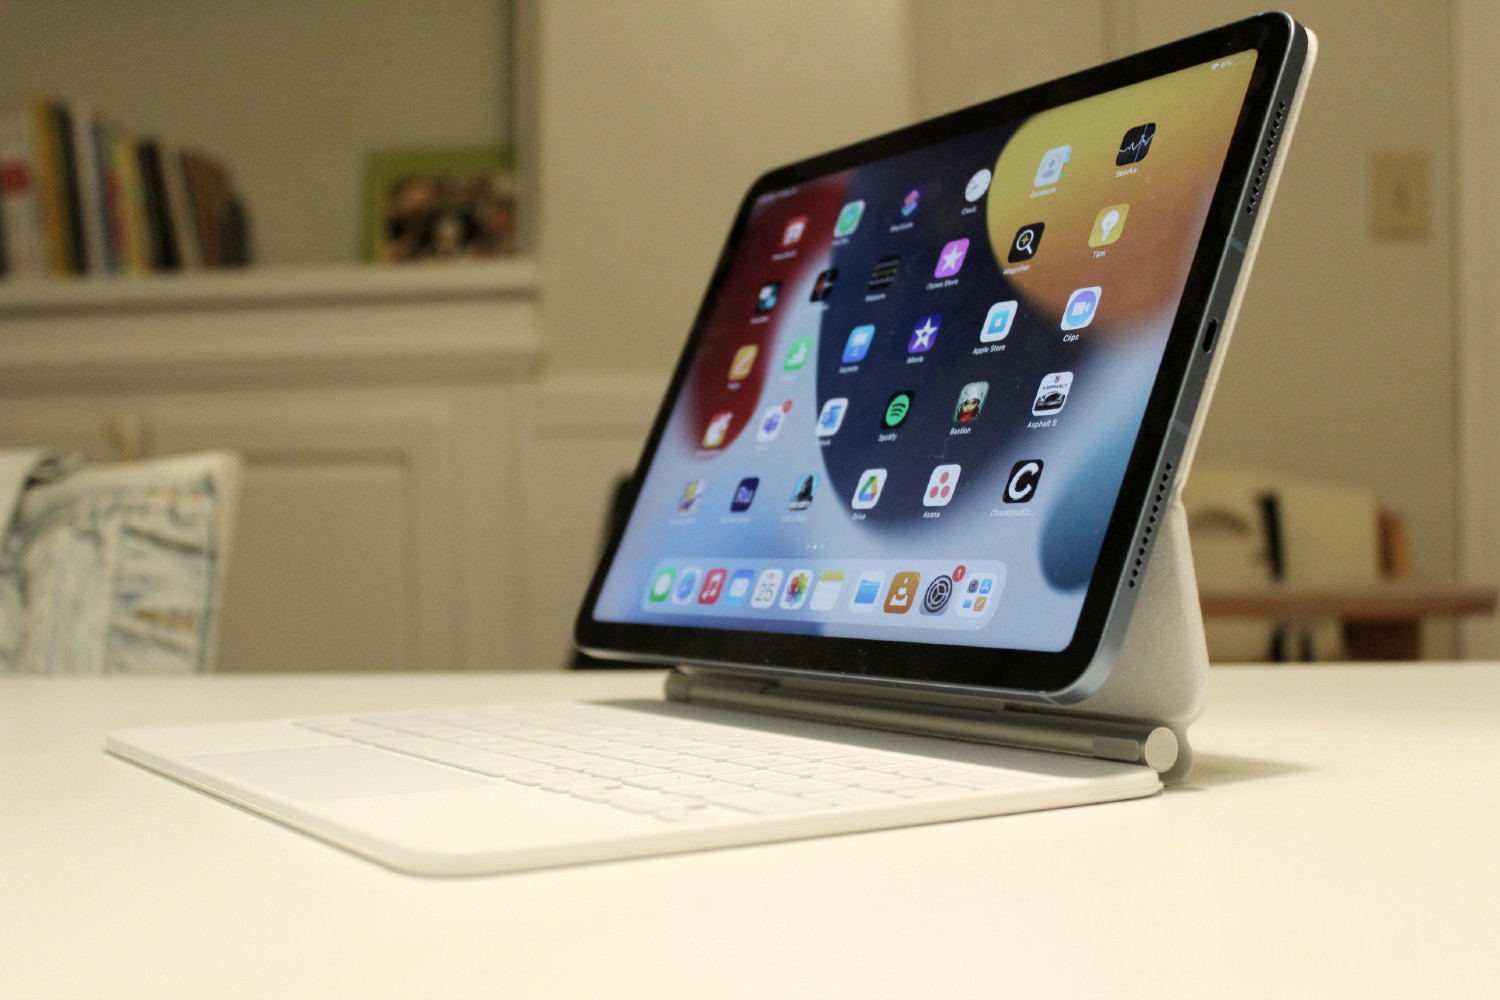 All-new iPad Air and iPad mini deliver dramatic power and